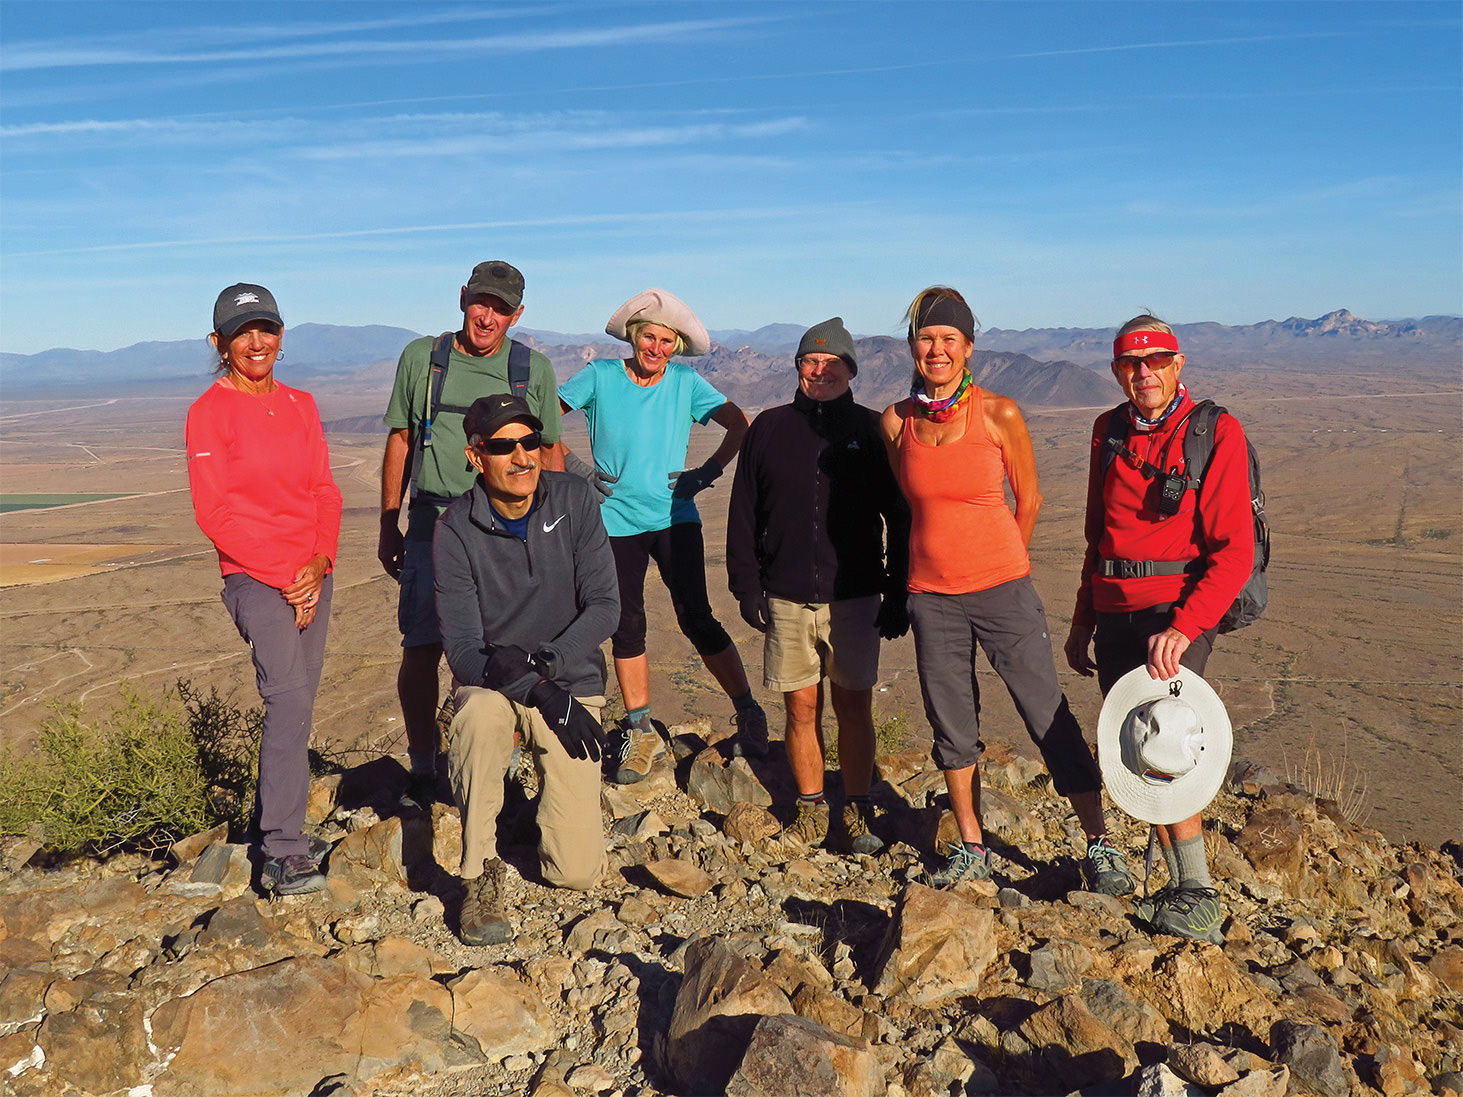 Left to right: Marilyn Reynolds, Clare Bangs, Mike Tansey, Eileen Lords-Mosse, Neal Wring, Kris Raczkiewicz, and Lynn Warren (photographer) enjoying 360-degree views from the summit of Saddle Mountain.